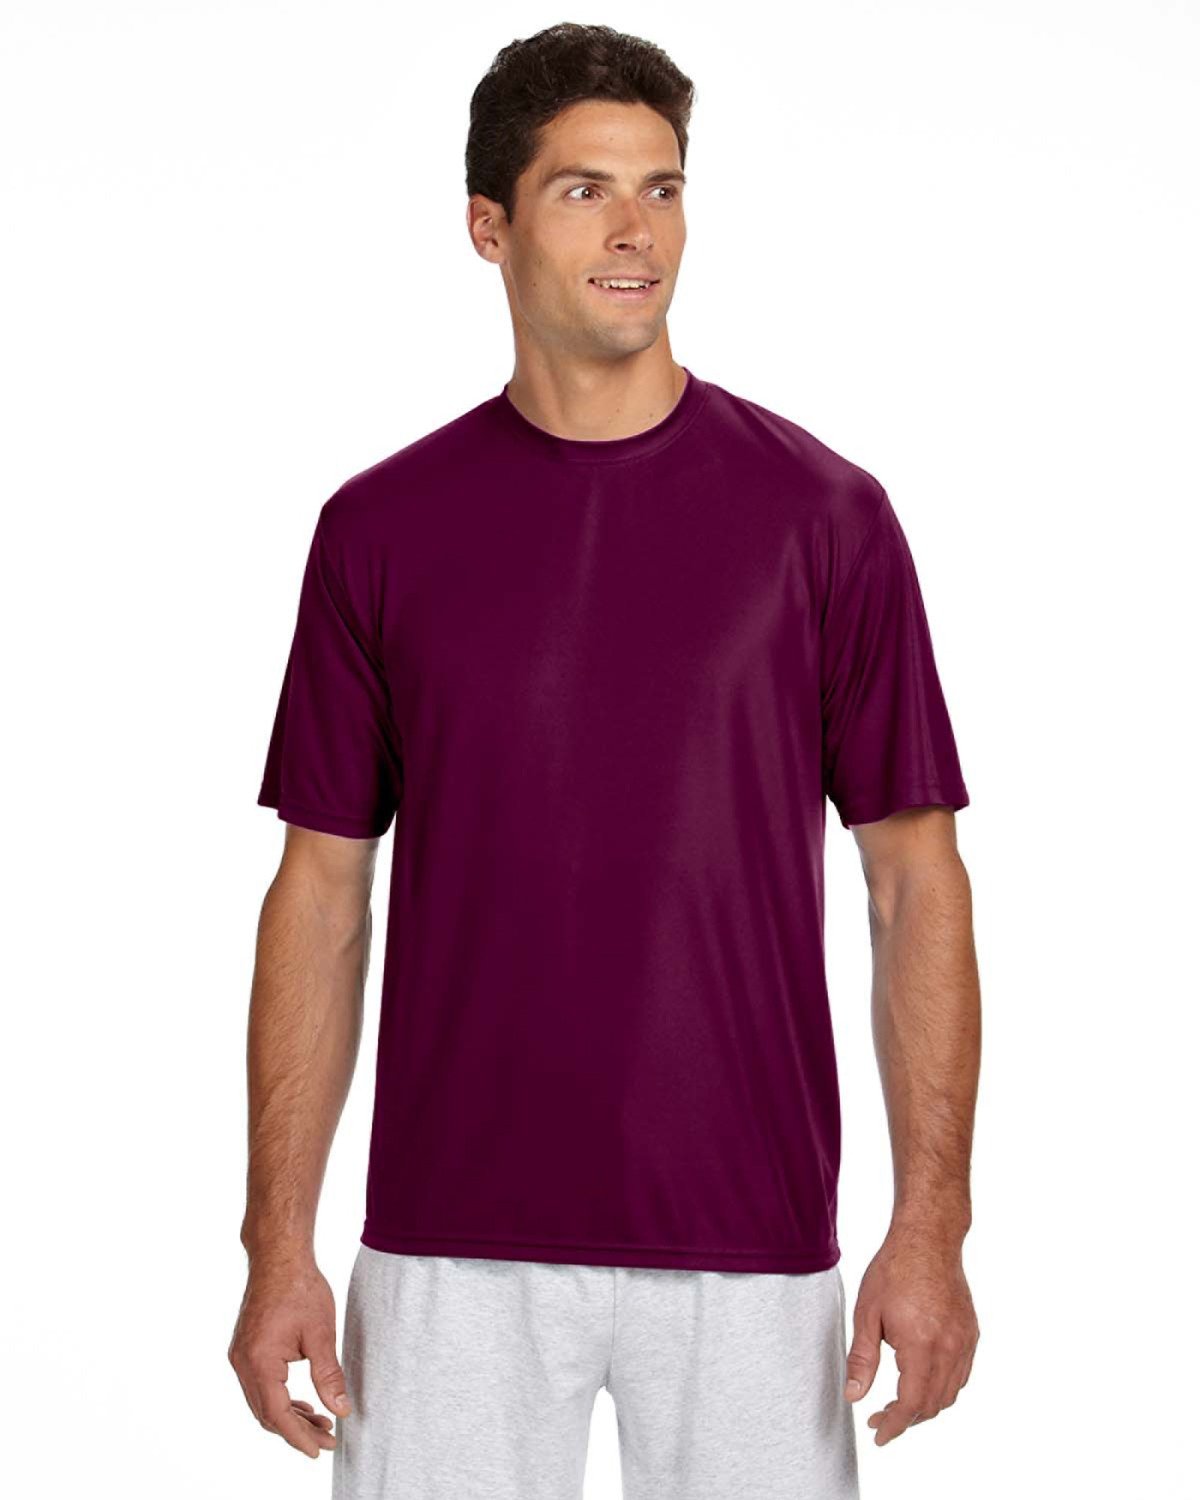 Maroon t-shirt, front view.